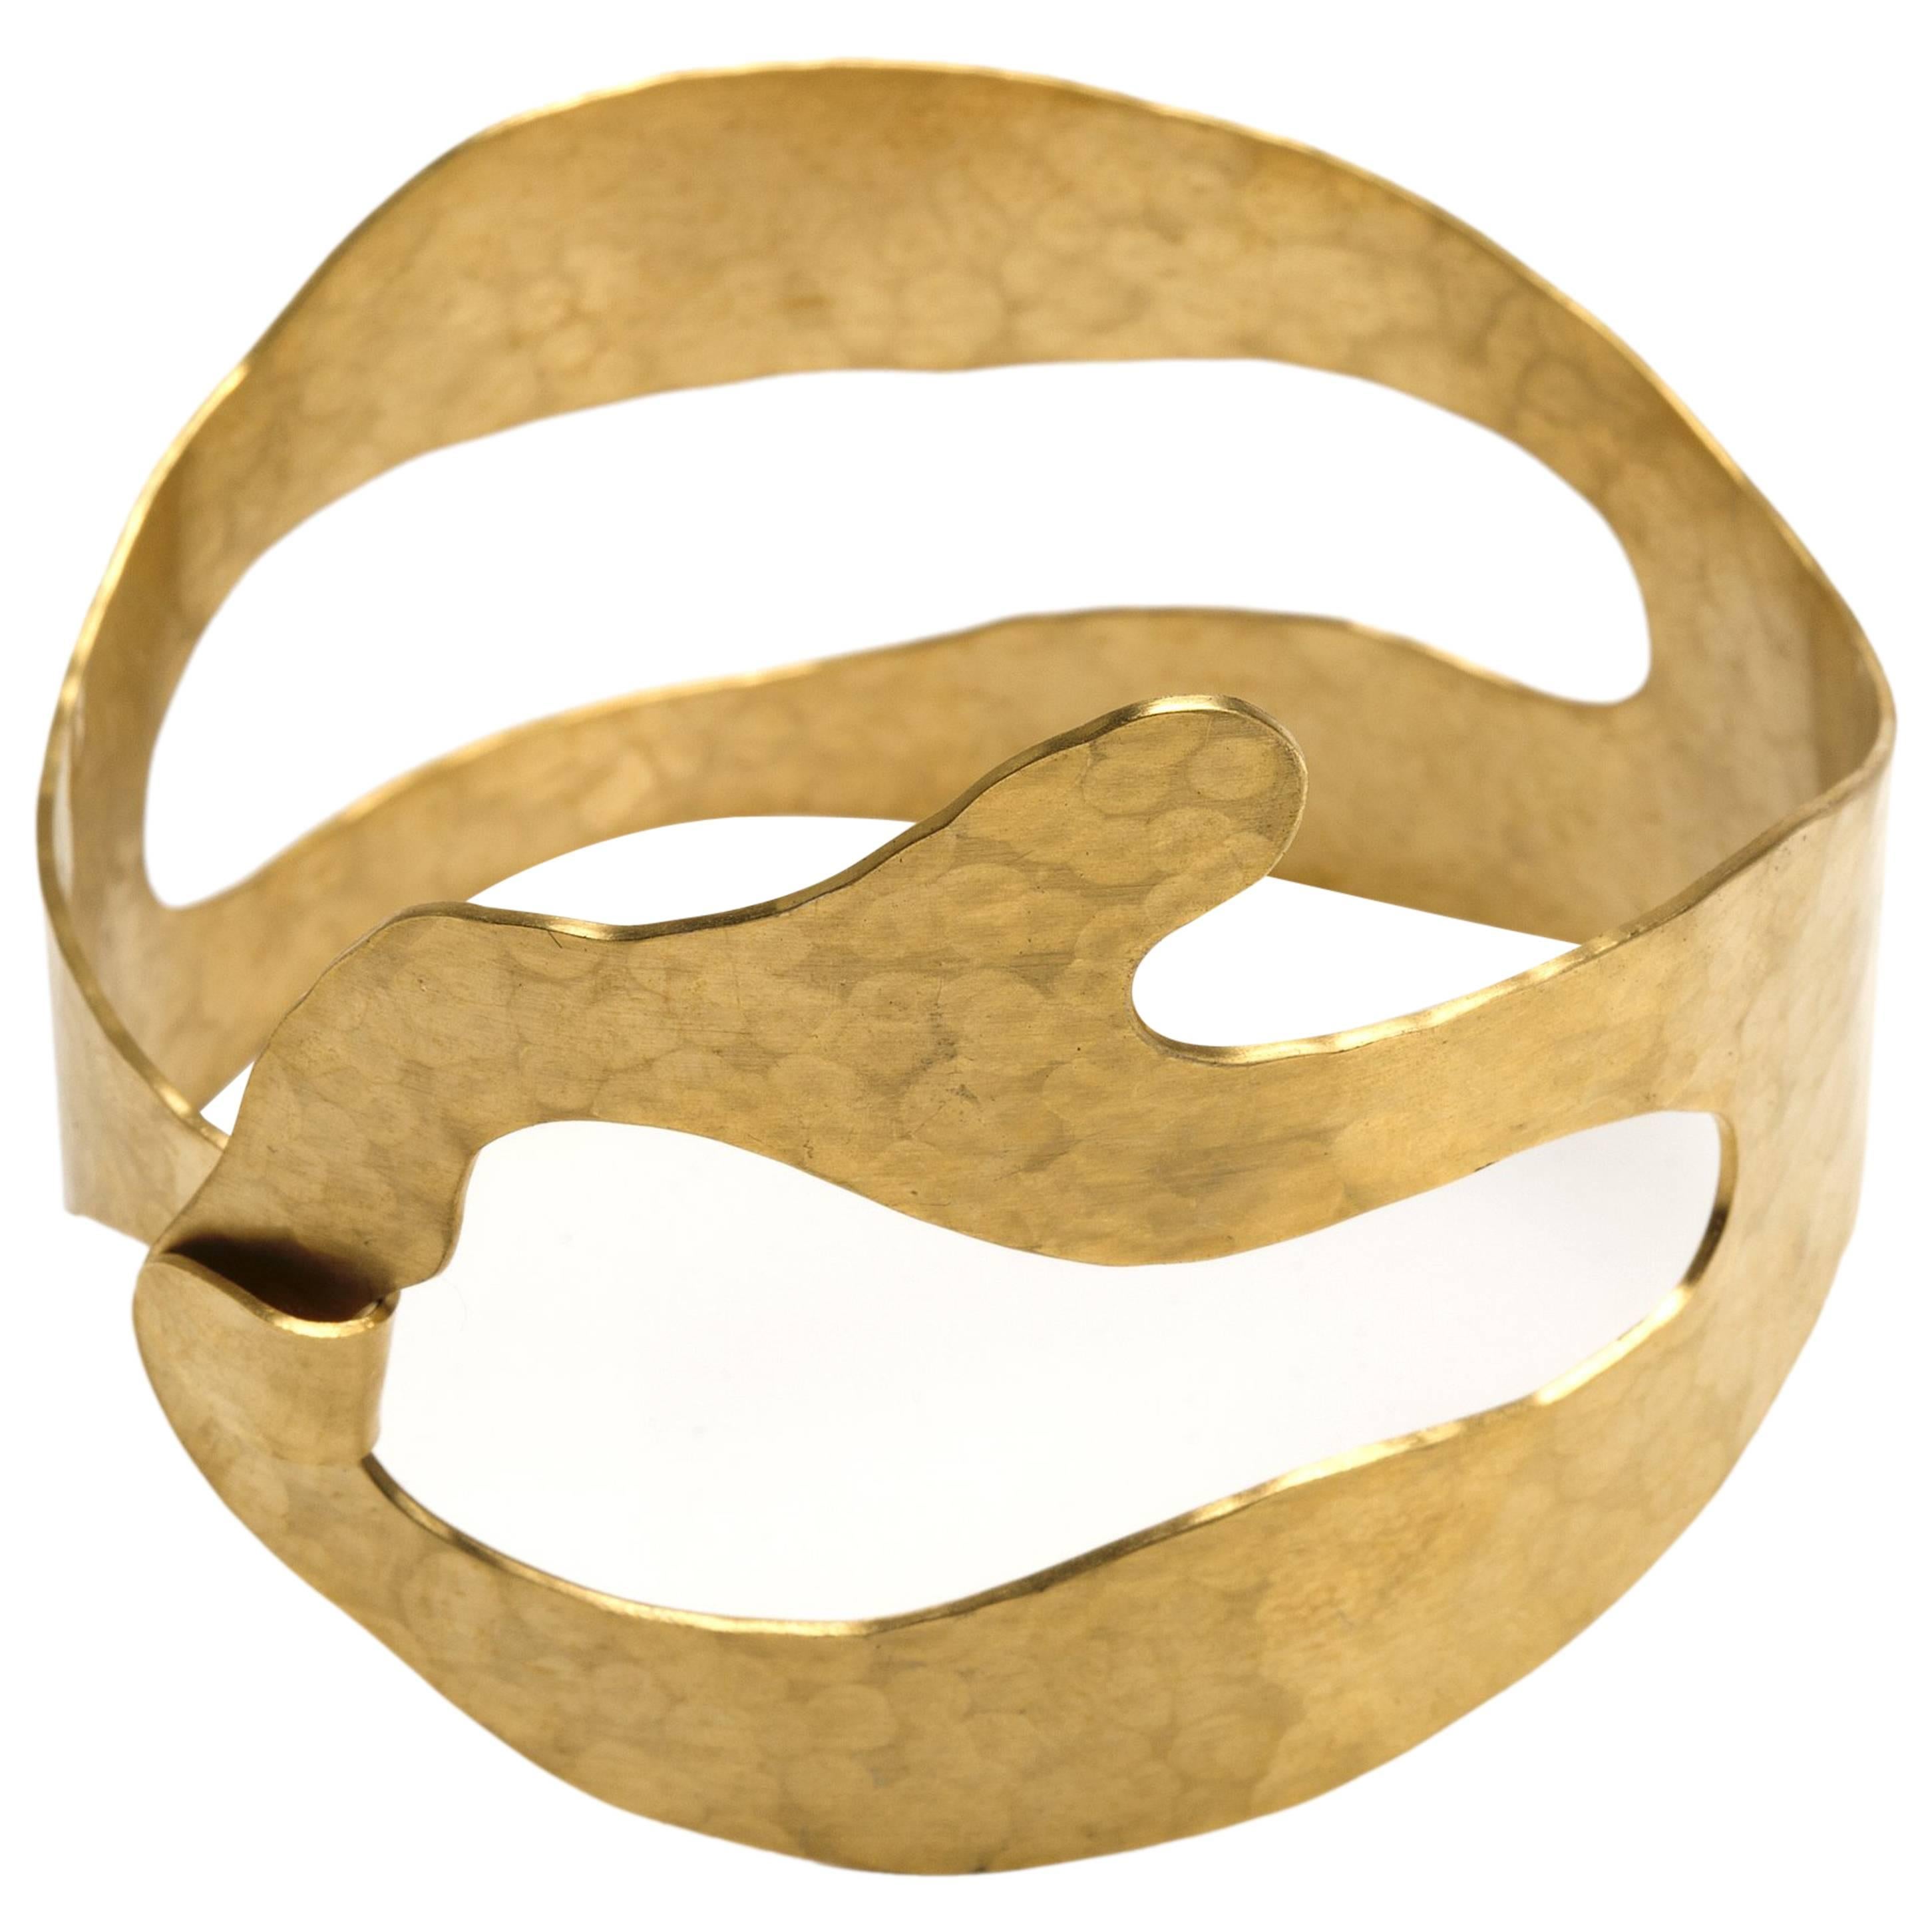 Gold-Plated and Hand-Hammered Bracelet by Jacques Jarrige For Sale